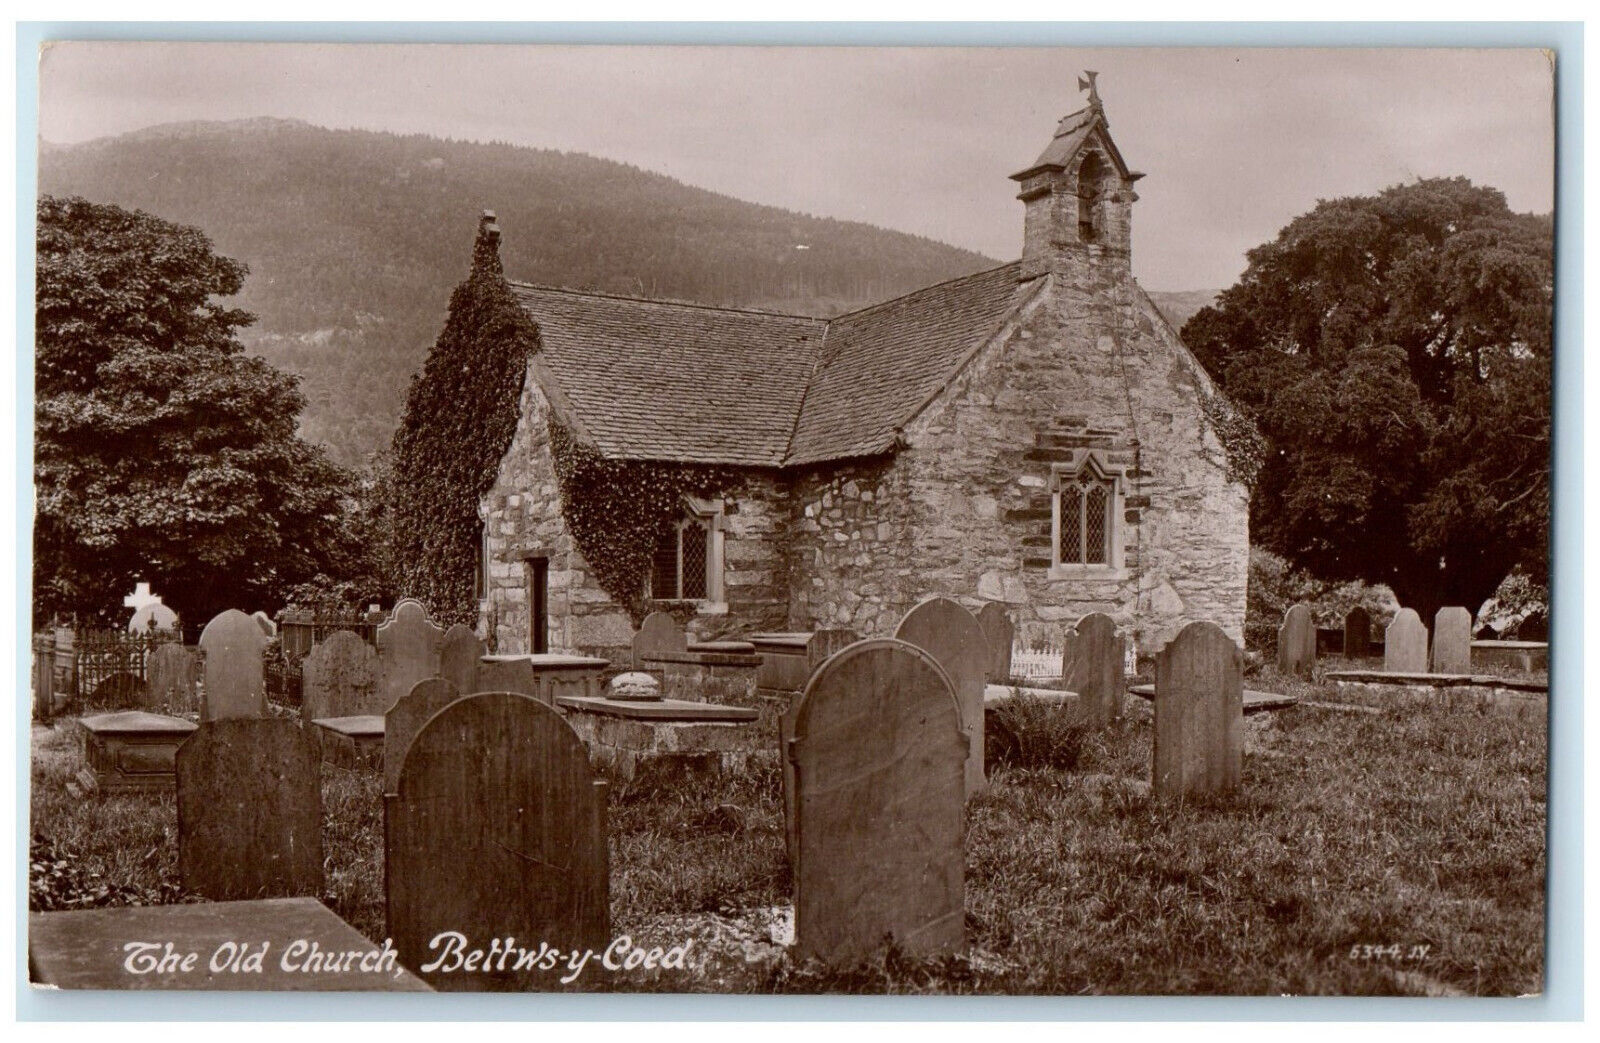 c1910 The Old Church Bettws-y-Coed Conwy County Wales RPPC Photo Postcard